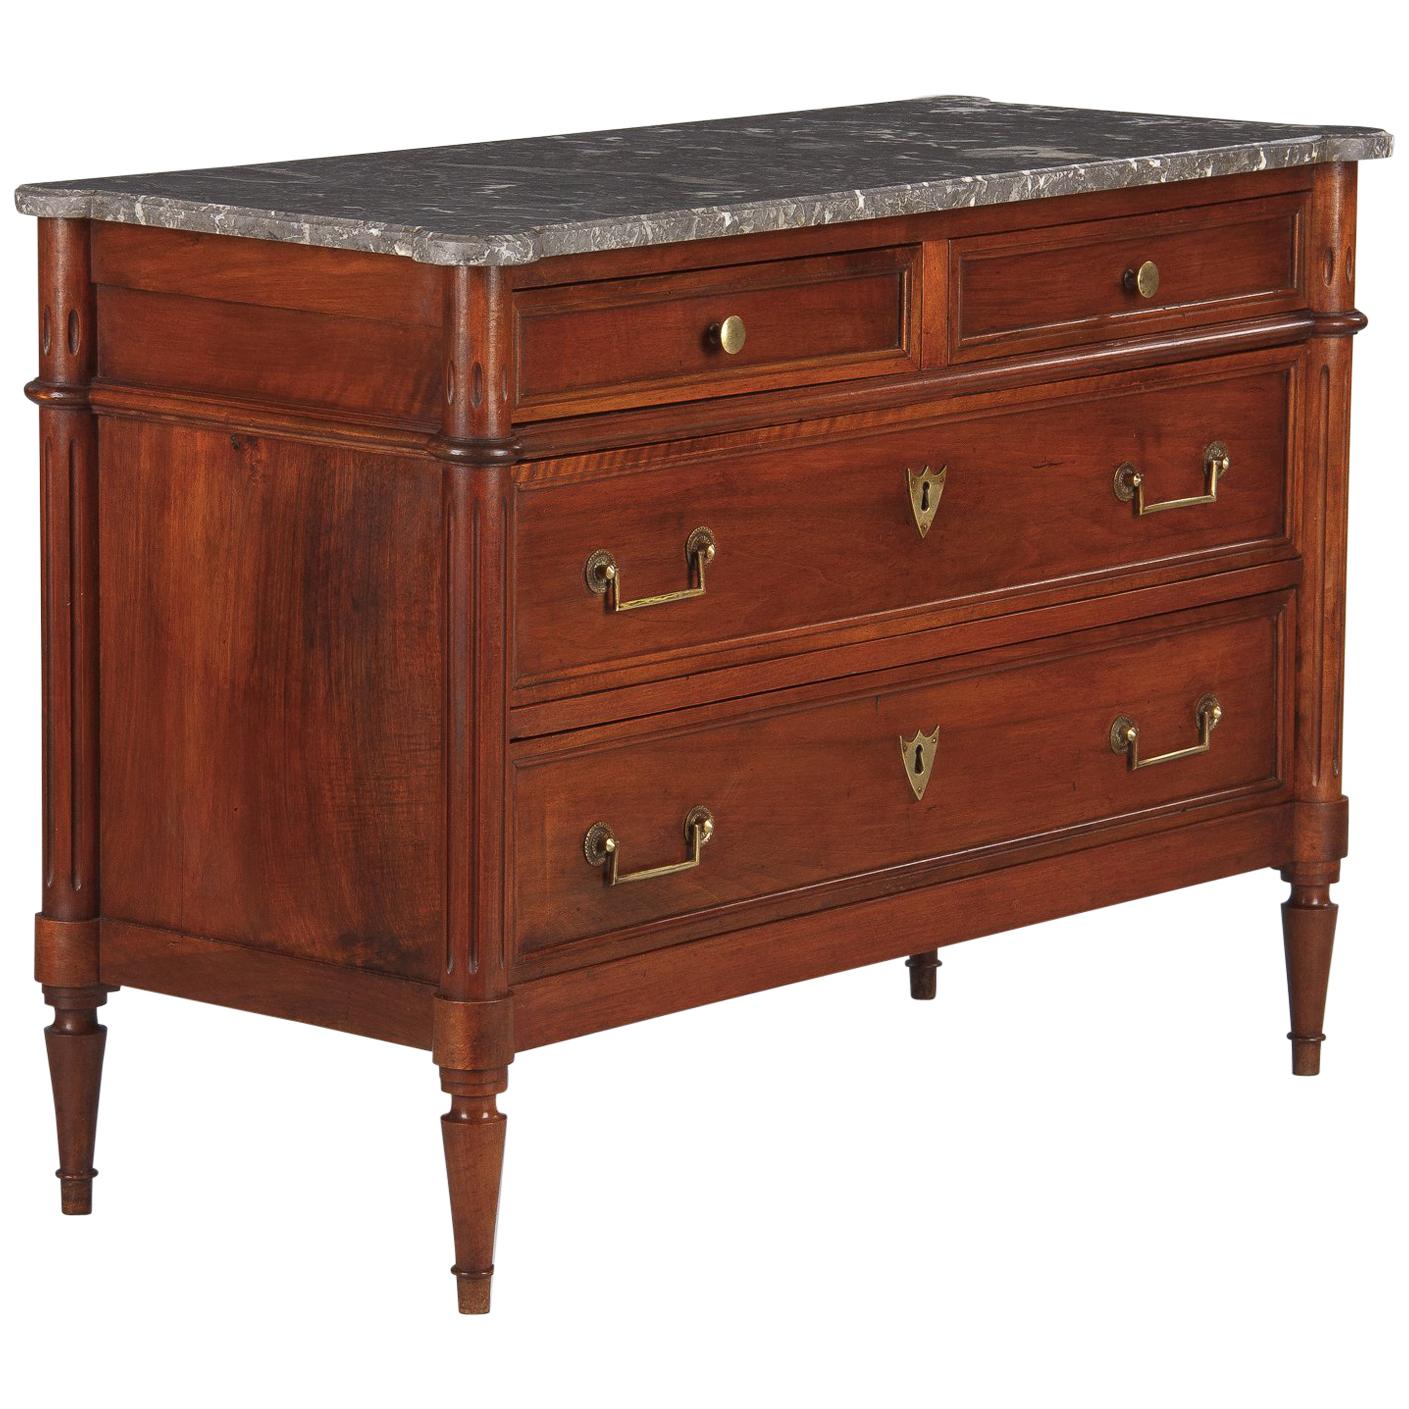 French Louis XVI Style Walnut Chest of Drawers with Marble Top, Late 1800s